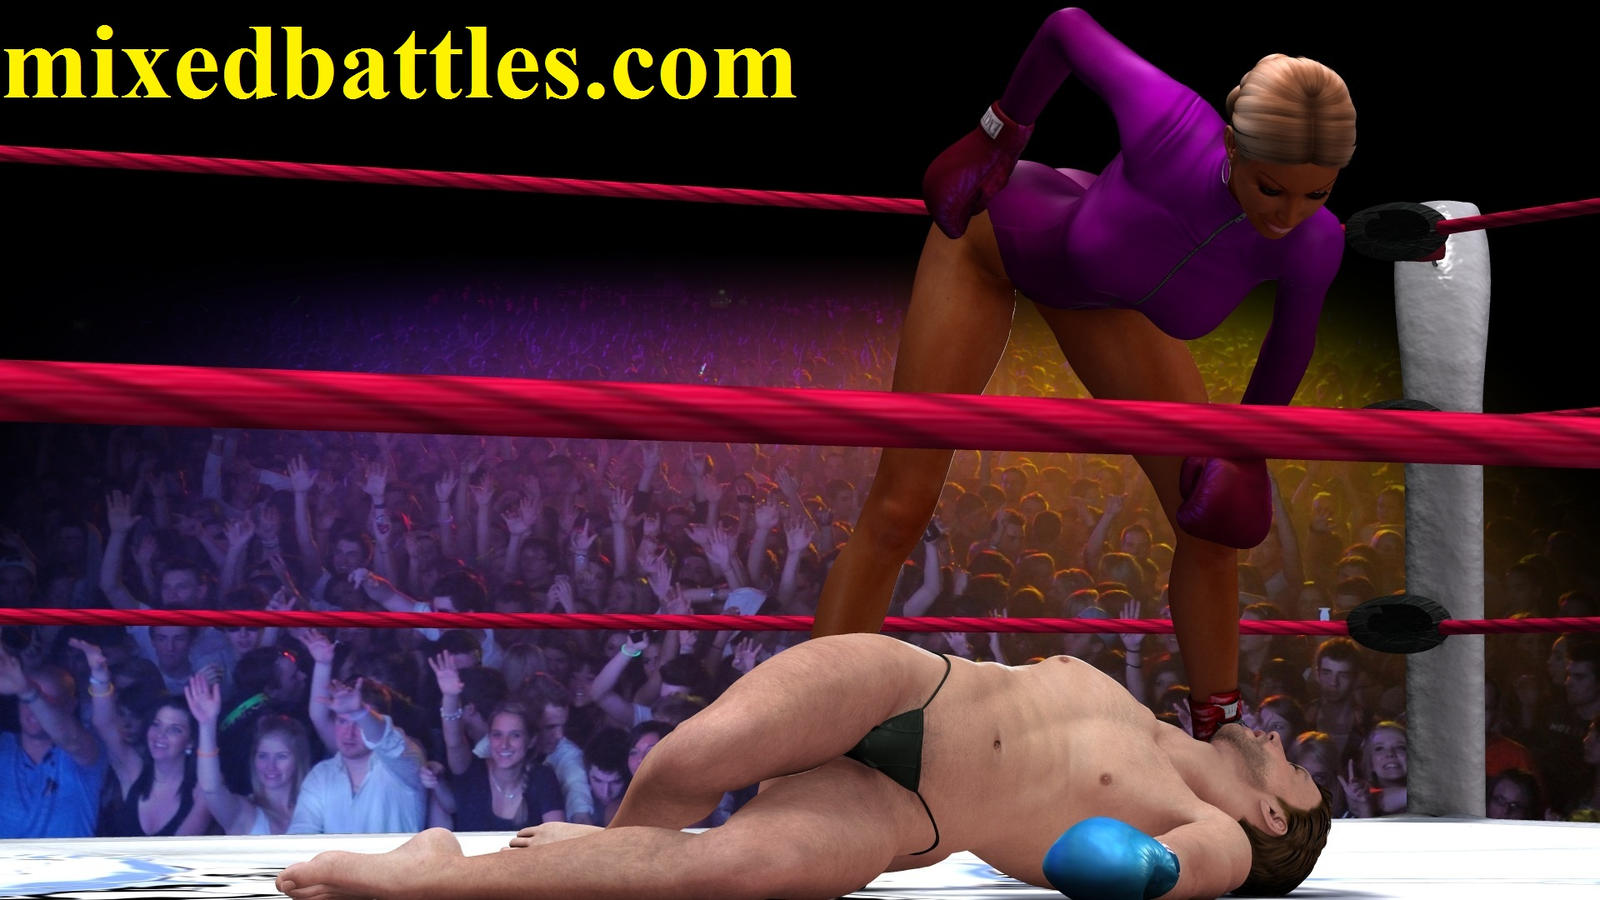 It contents weekly updating FullHD 3D art galleries: mixed wrestling, catfi...